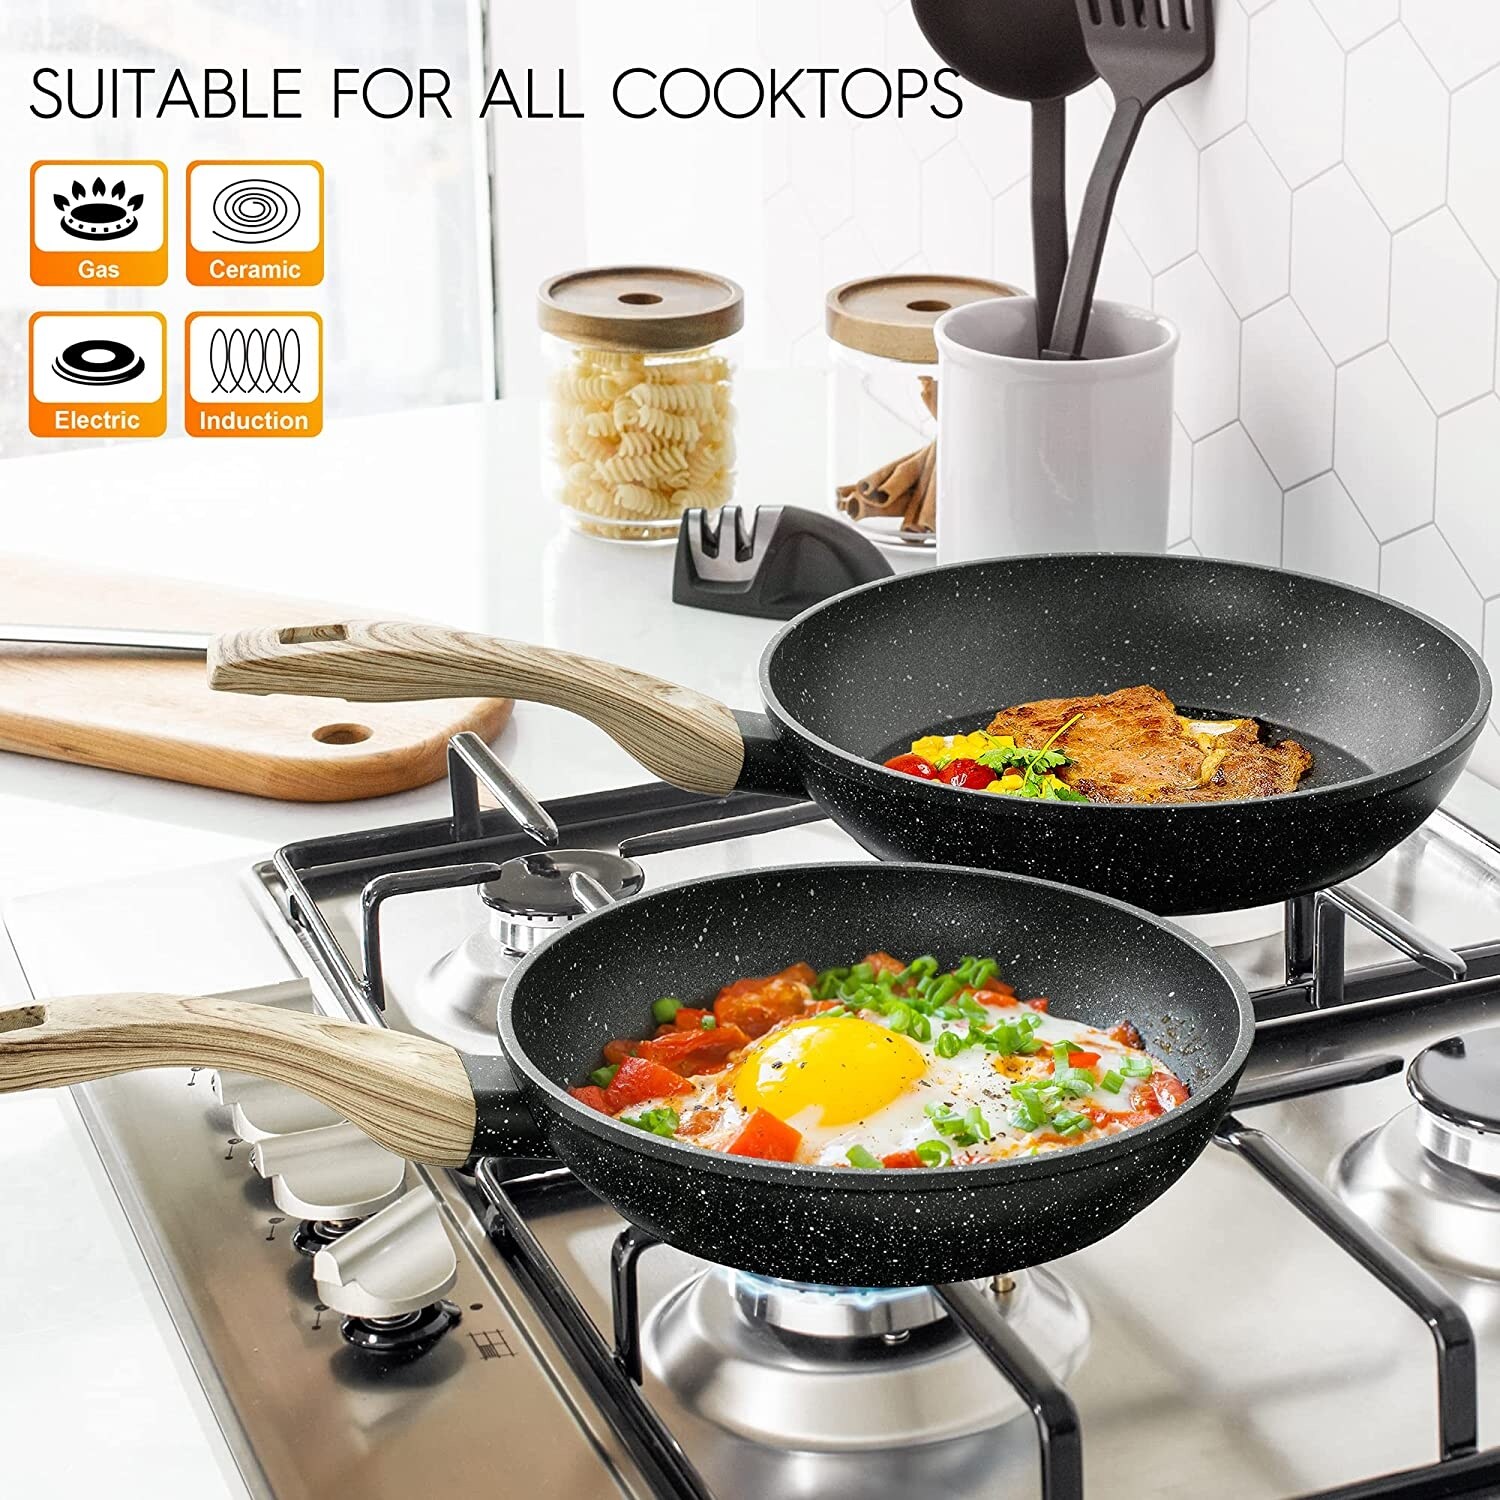 https://ak1.ostkcdn.com/images/products/is/images/direct/0fdb6340f541325ee2ddc63dc38278fb78ce0630/White-Pots-and-Pans-Set-Nonstick-Cookware-Sets%2C-12pcs-White-Granite-Cookware-Set-Induction-Compatible.jpg